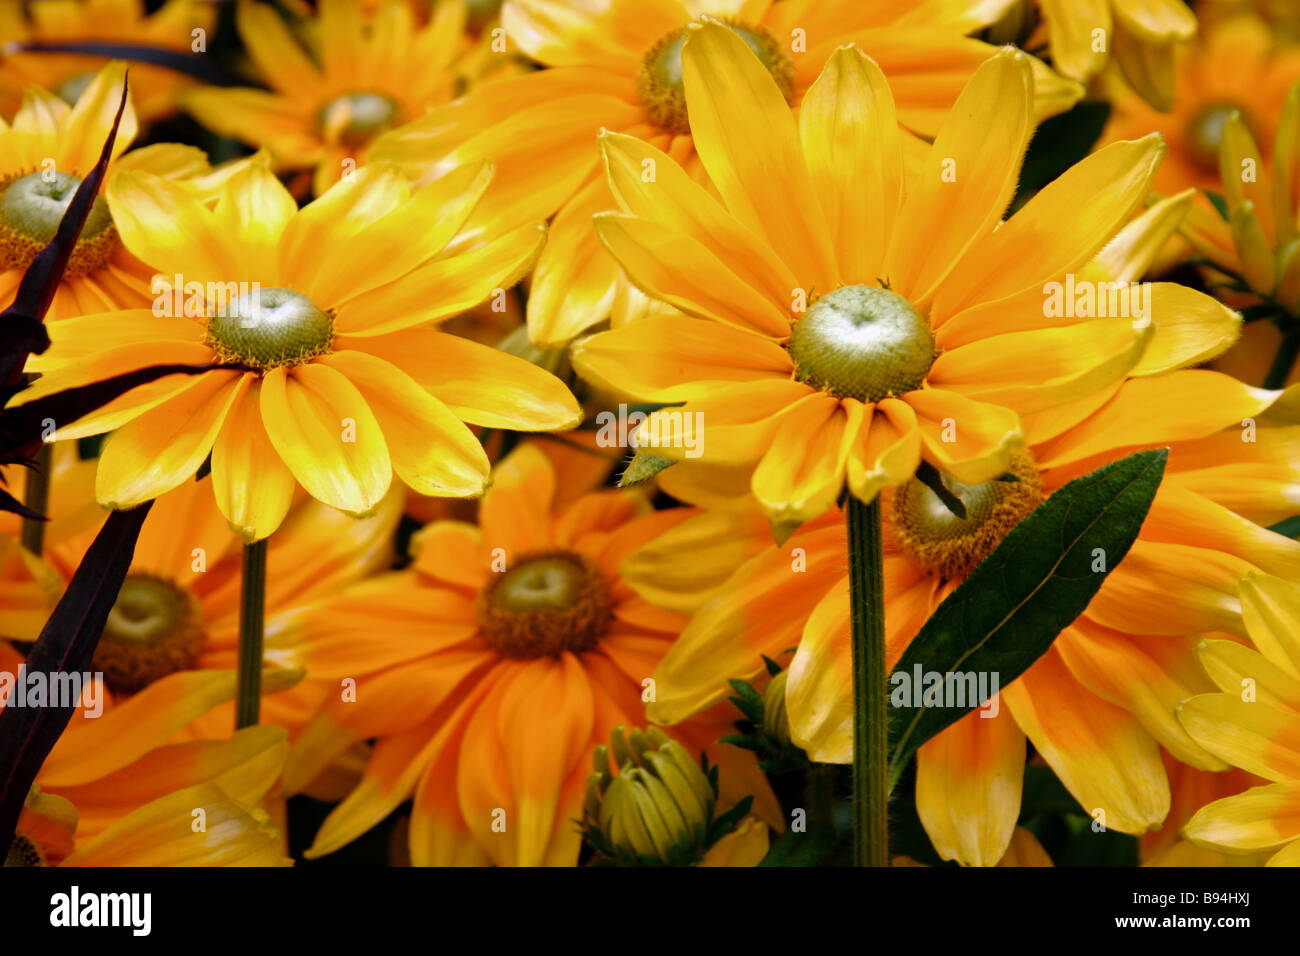 Close-up of a bunch of yellow daisy flowers Stock Photo